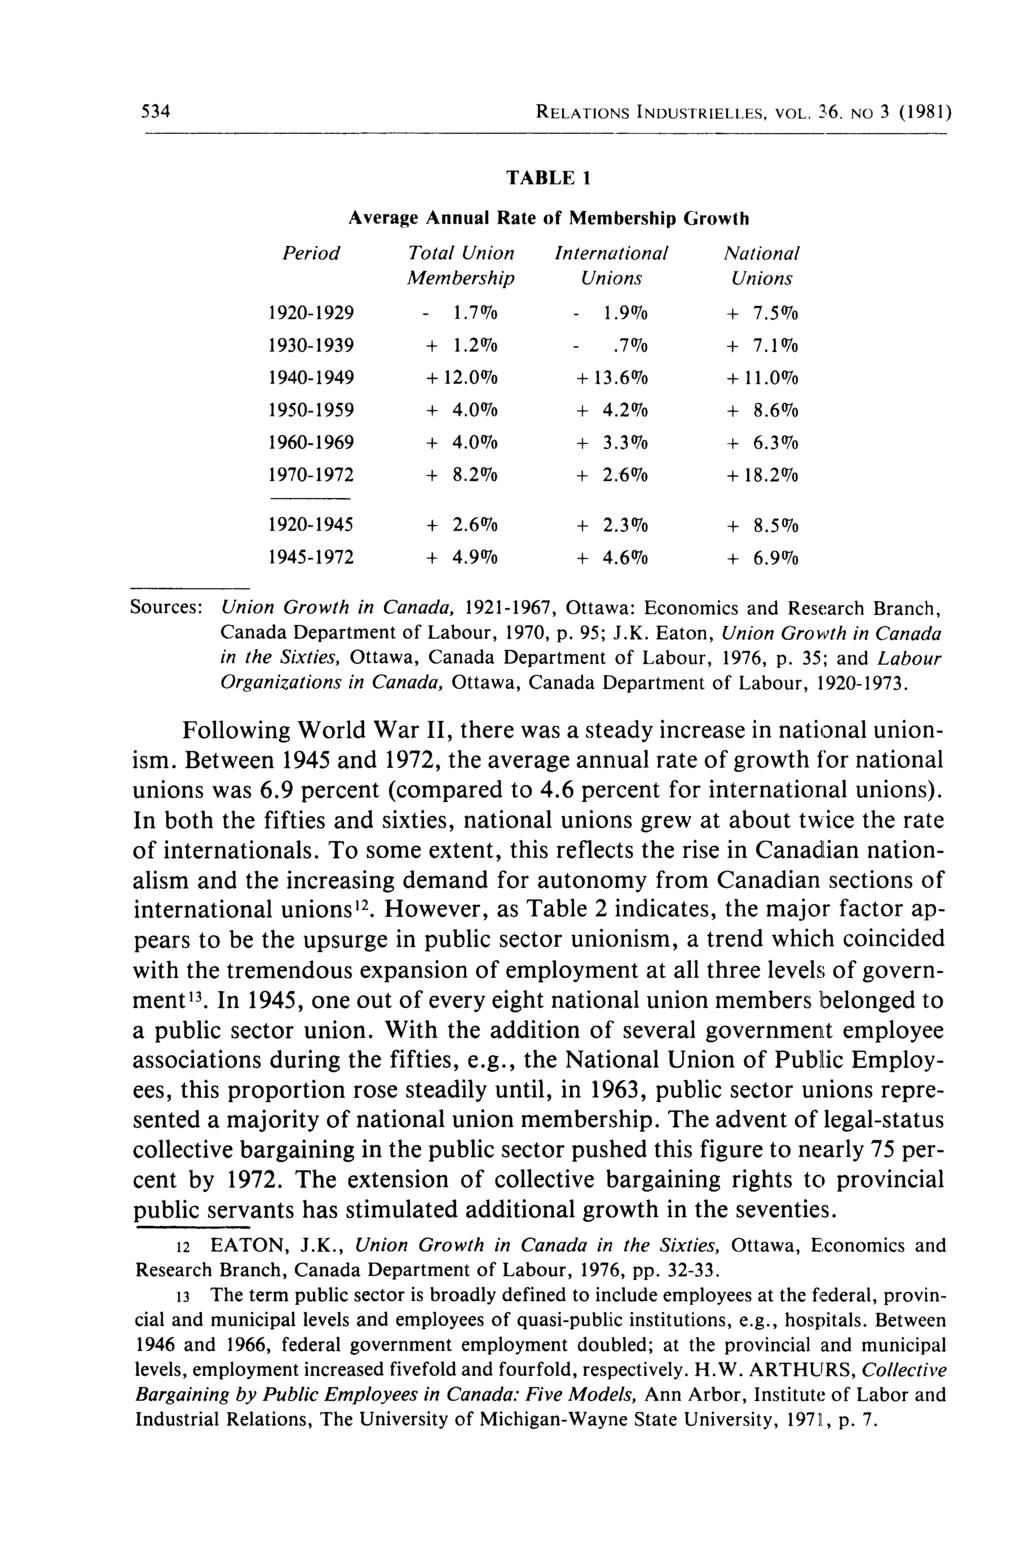 534 RELATIONS INDUSTRIELLES, VOL. 36. NO 3 (1981) TABLE 1 Average Annual Rate of Membership Growth Period Total Union Membership International Unions National Unions 1920-1929 - 1.7% - 1.9% + 7.